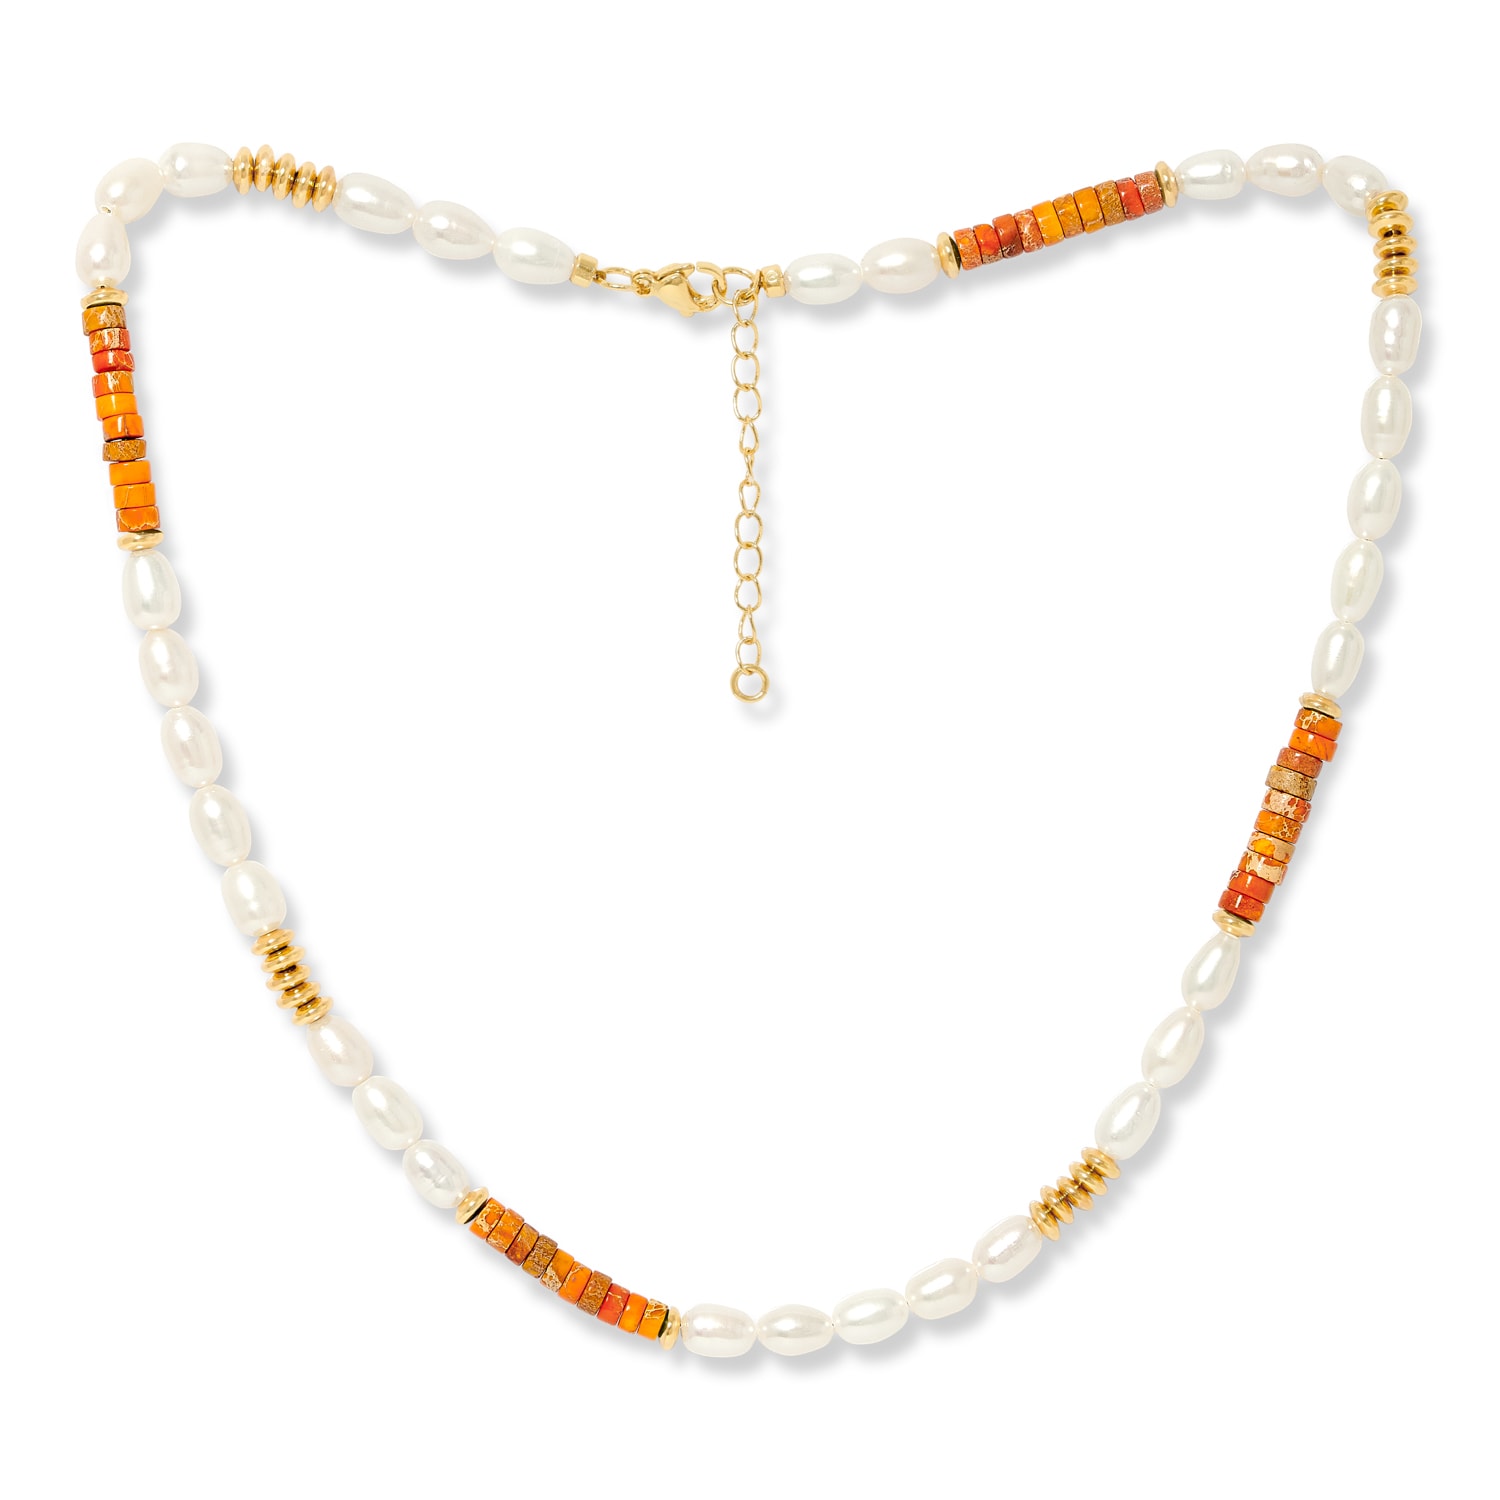 Women’s Yellow / Orange / White Nova Oval Cultured Freshwater Pearls Necklace With Orange Jasper & Gold Beads Pearls of the Orient Online